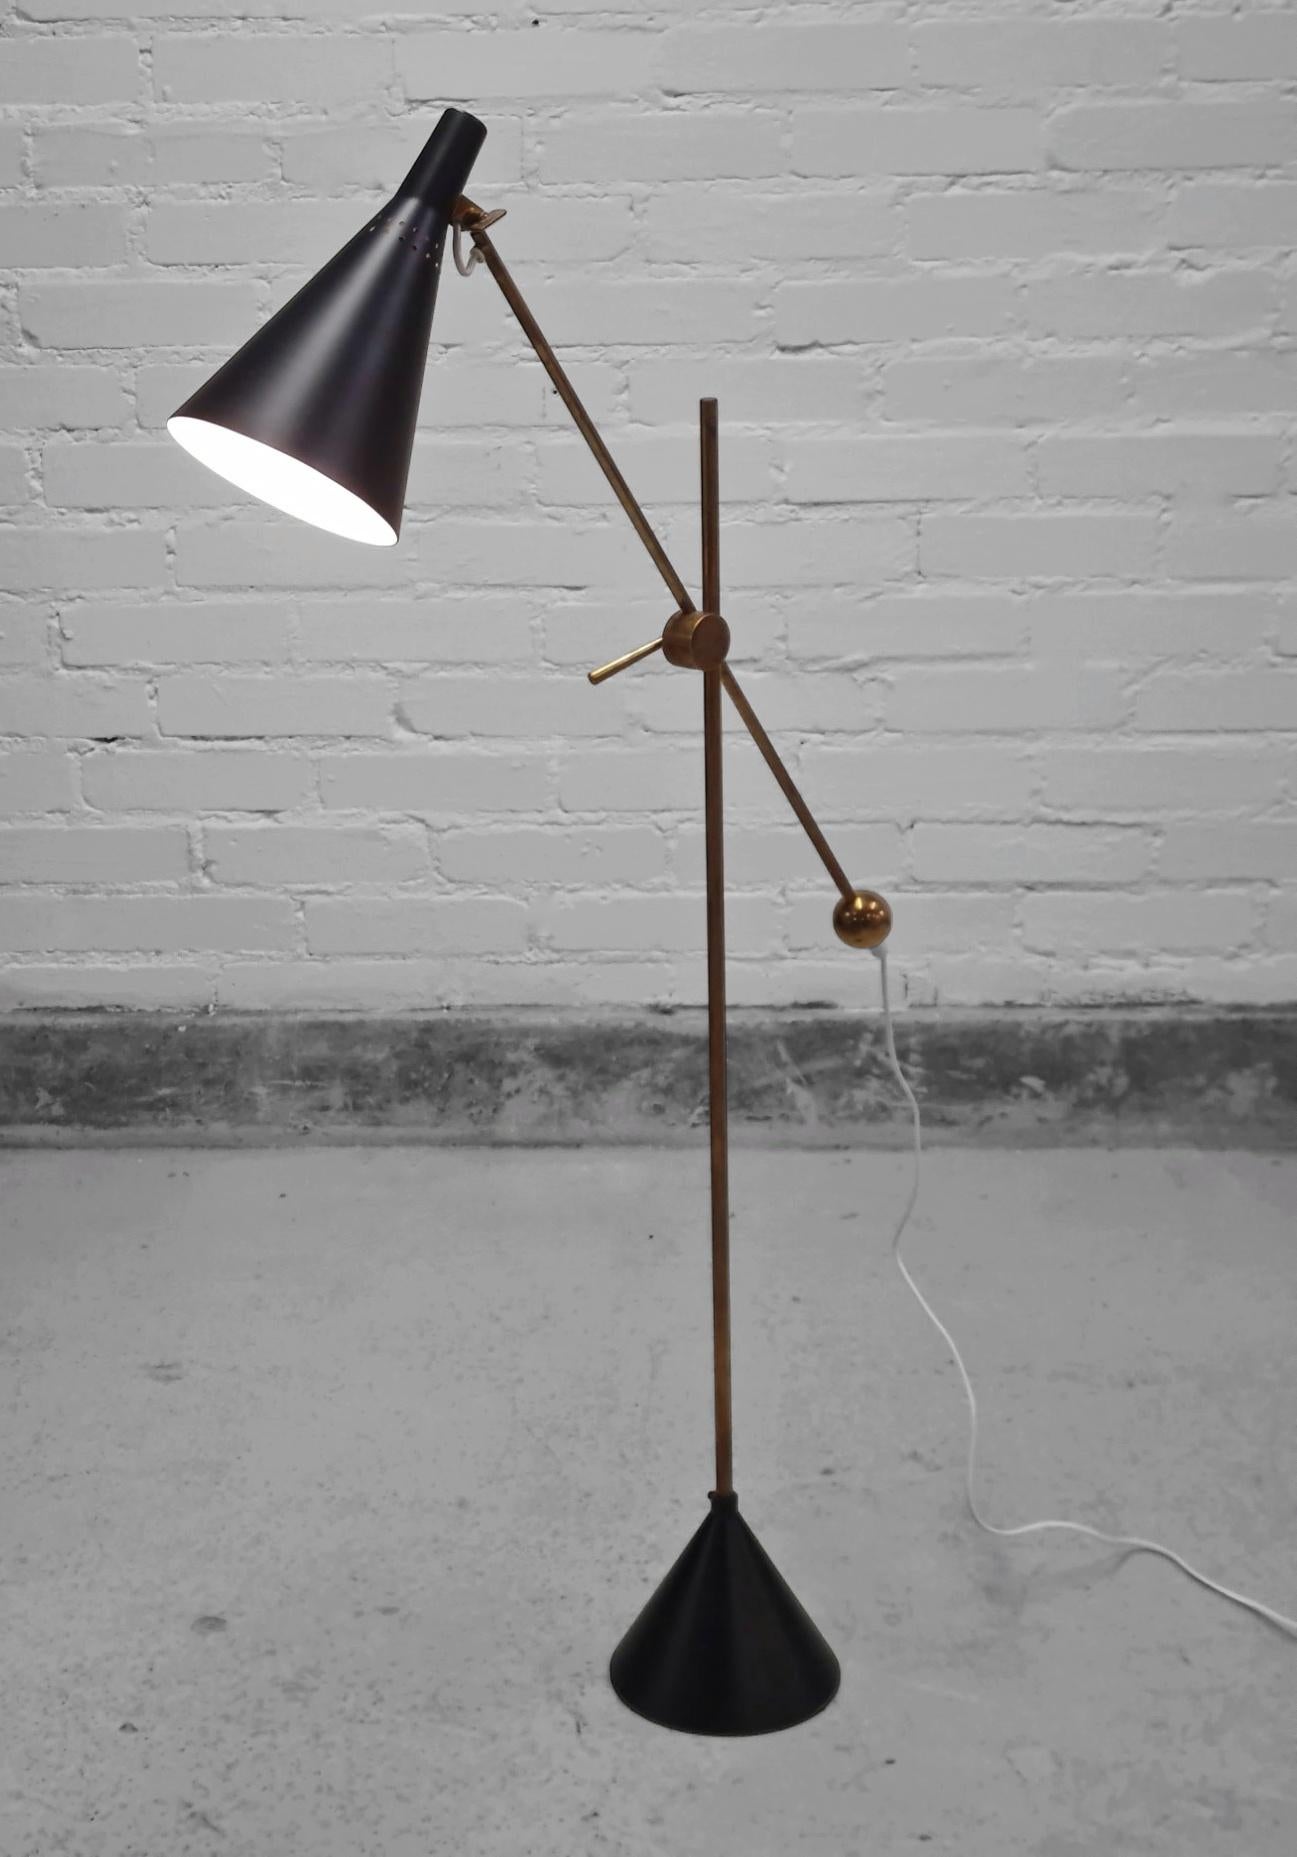 This example of the iconic Tapio Wirkkala floor lamp manufactured and stamped by Idman, retains all original parts and is in beautiful condition. The lamp has been rewired, brass parts polished, and metal parts professionally repainted with the same